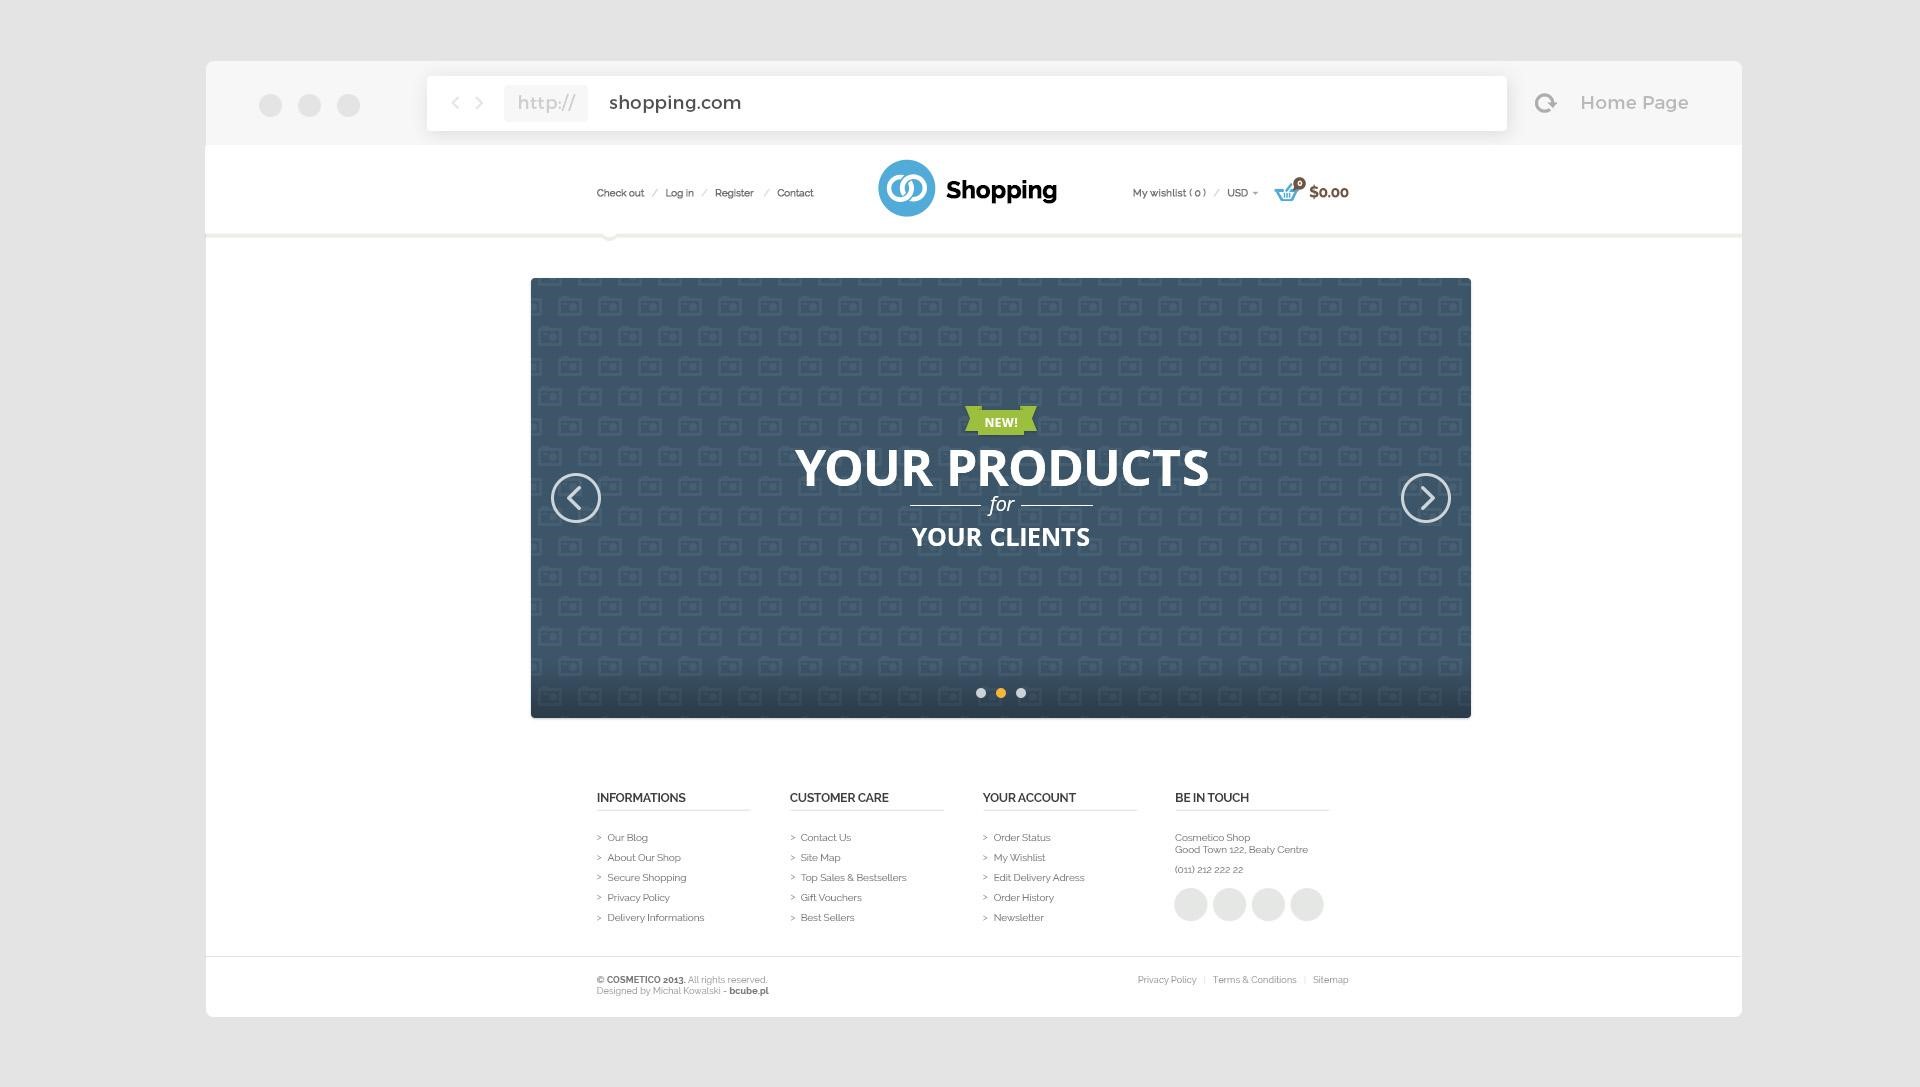 Six must-have elements for an e-commerce homepage